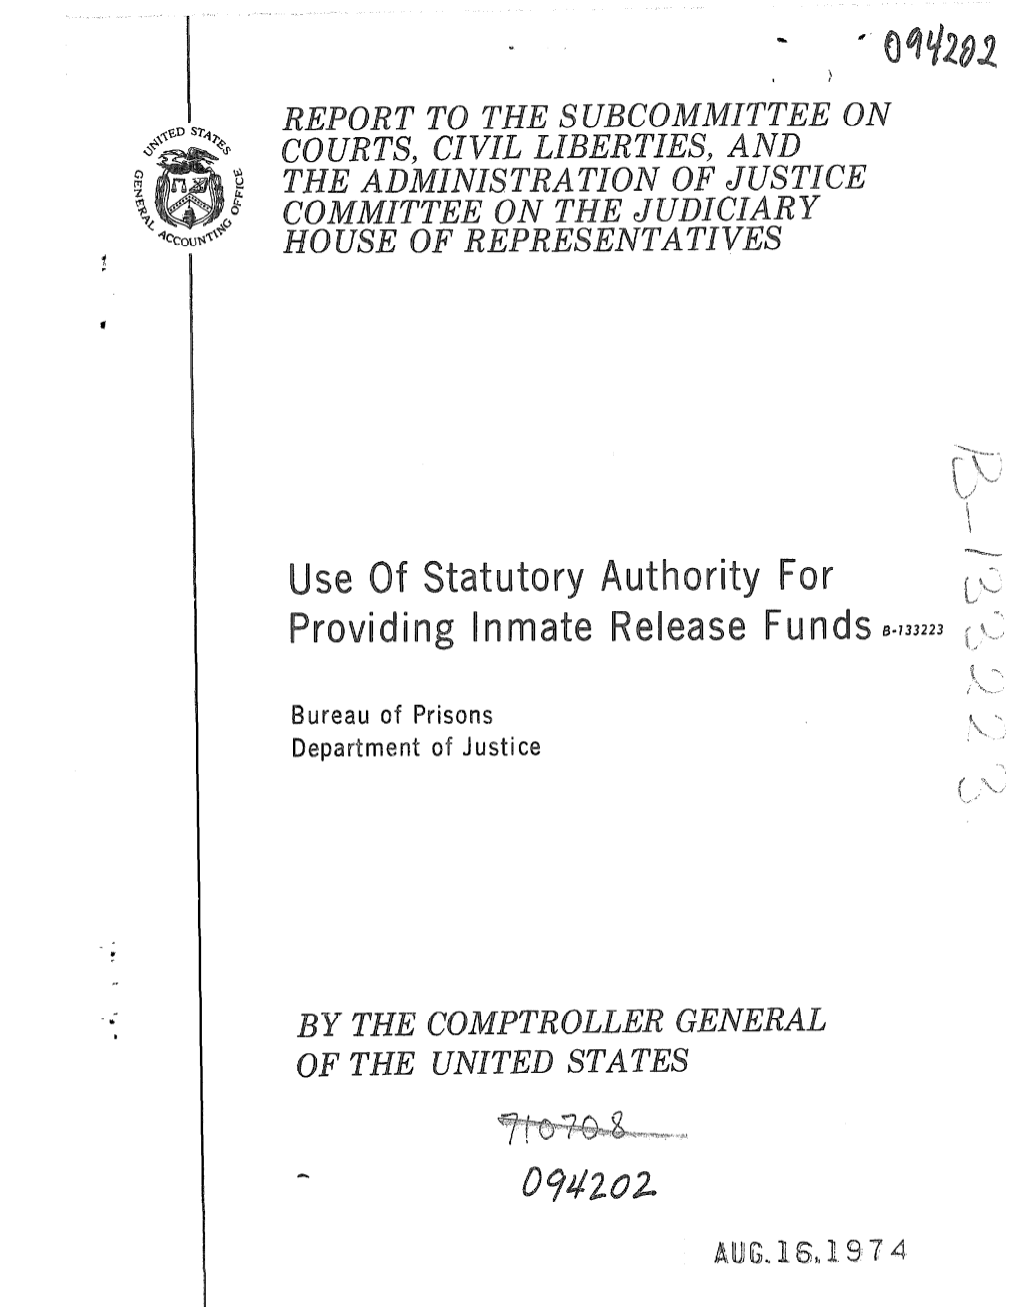 B-133223 Use of Statutory Authority for Providing Inmate Release Funds